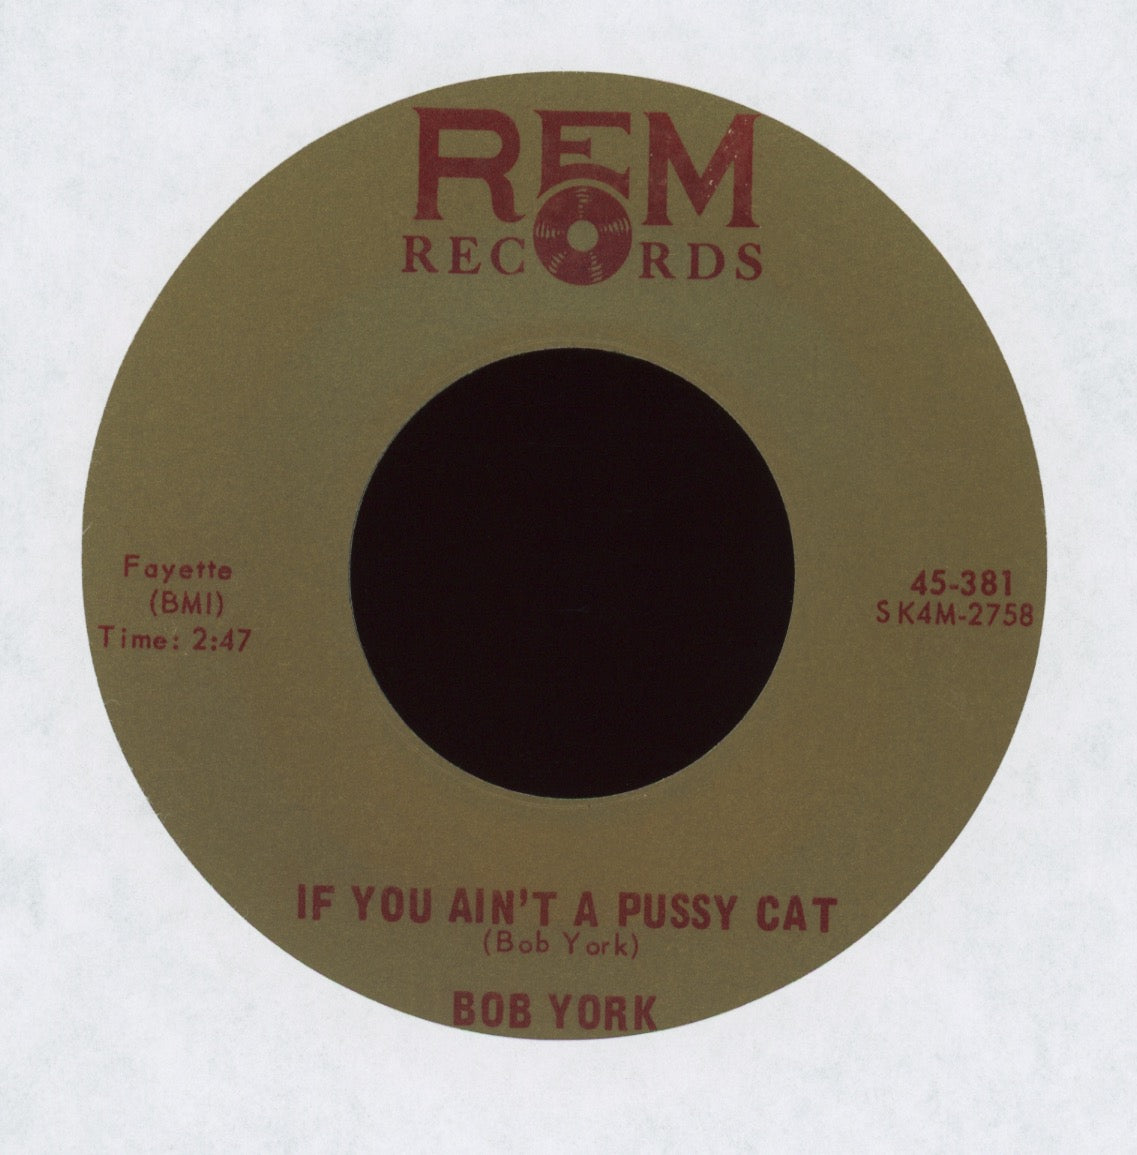 Bob York - If You Ain't A Pussy Cat on REM